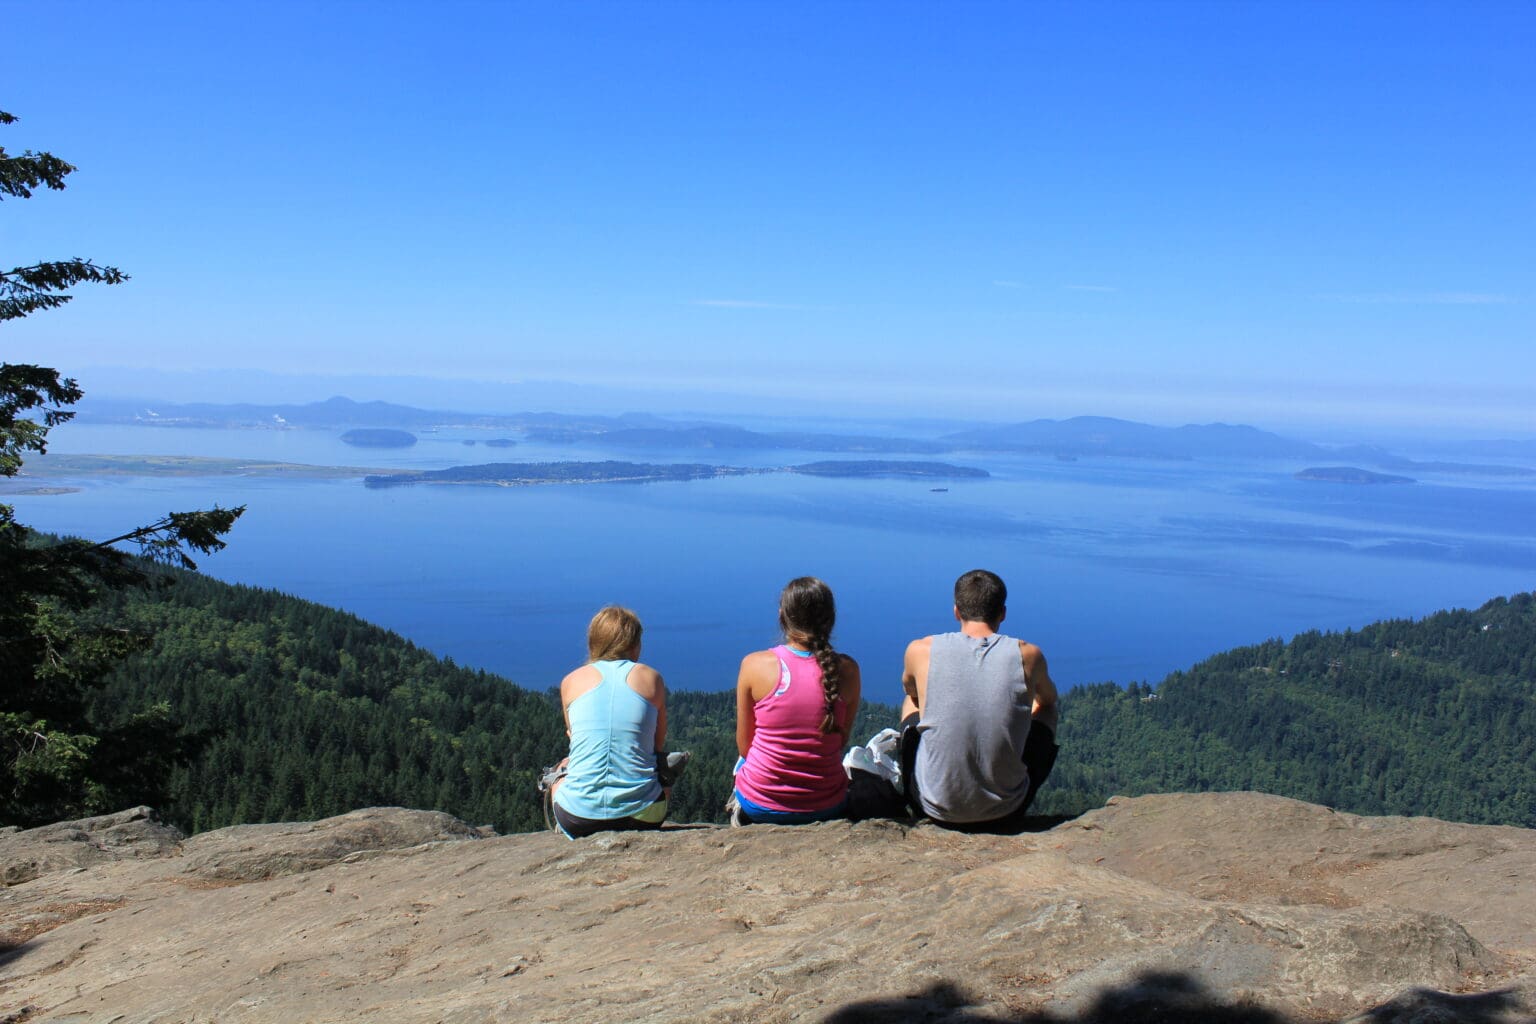 A Trek for Treasure team stops for a break on the edge of the mountain during the Oyster Dome hike.